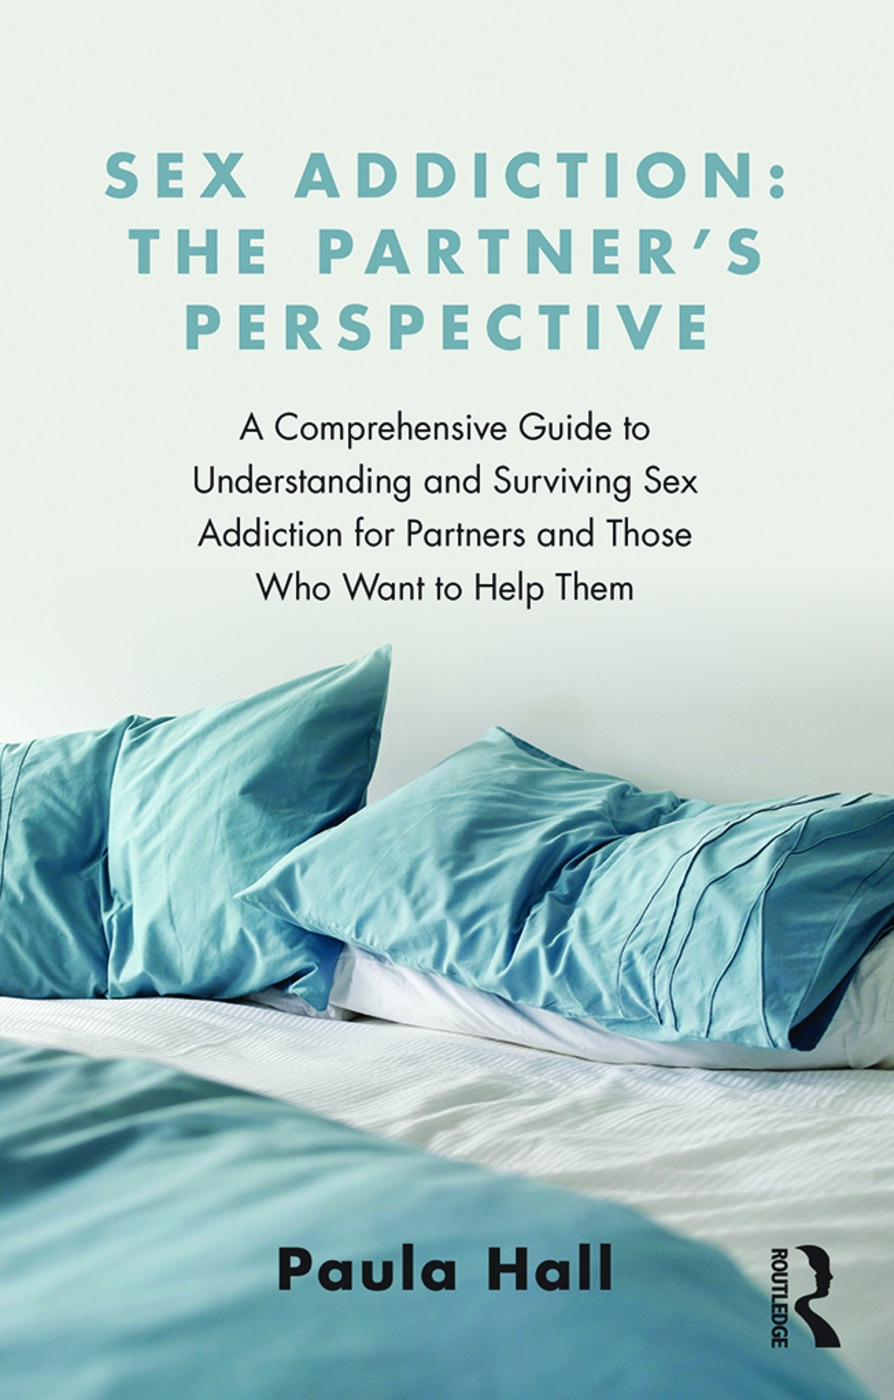 Sex Addiction: The Partner’s Perspective: A Comprehensive Guide to Understanding and Surviving Sex Addiction for Partners and Those Who Want to Help T